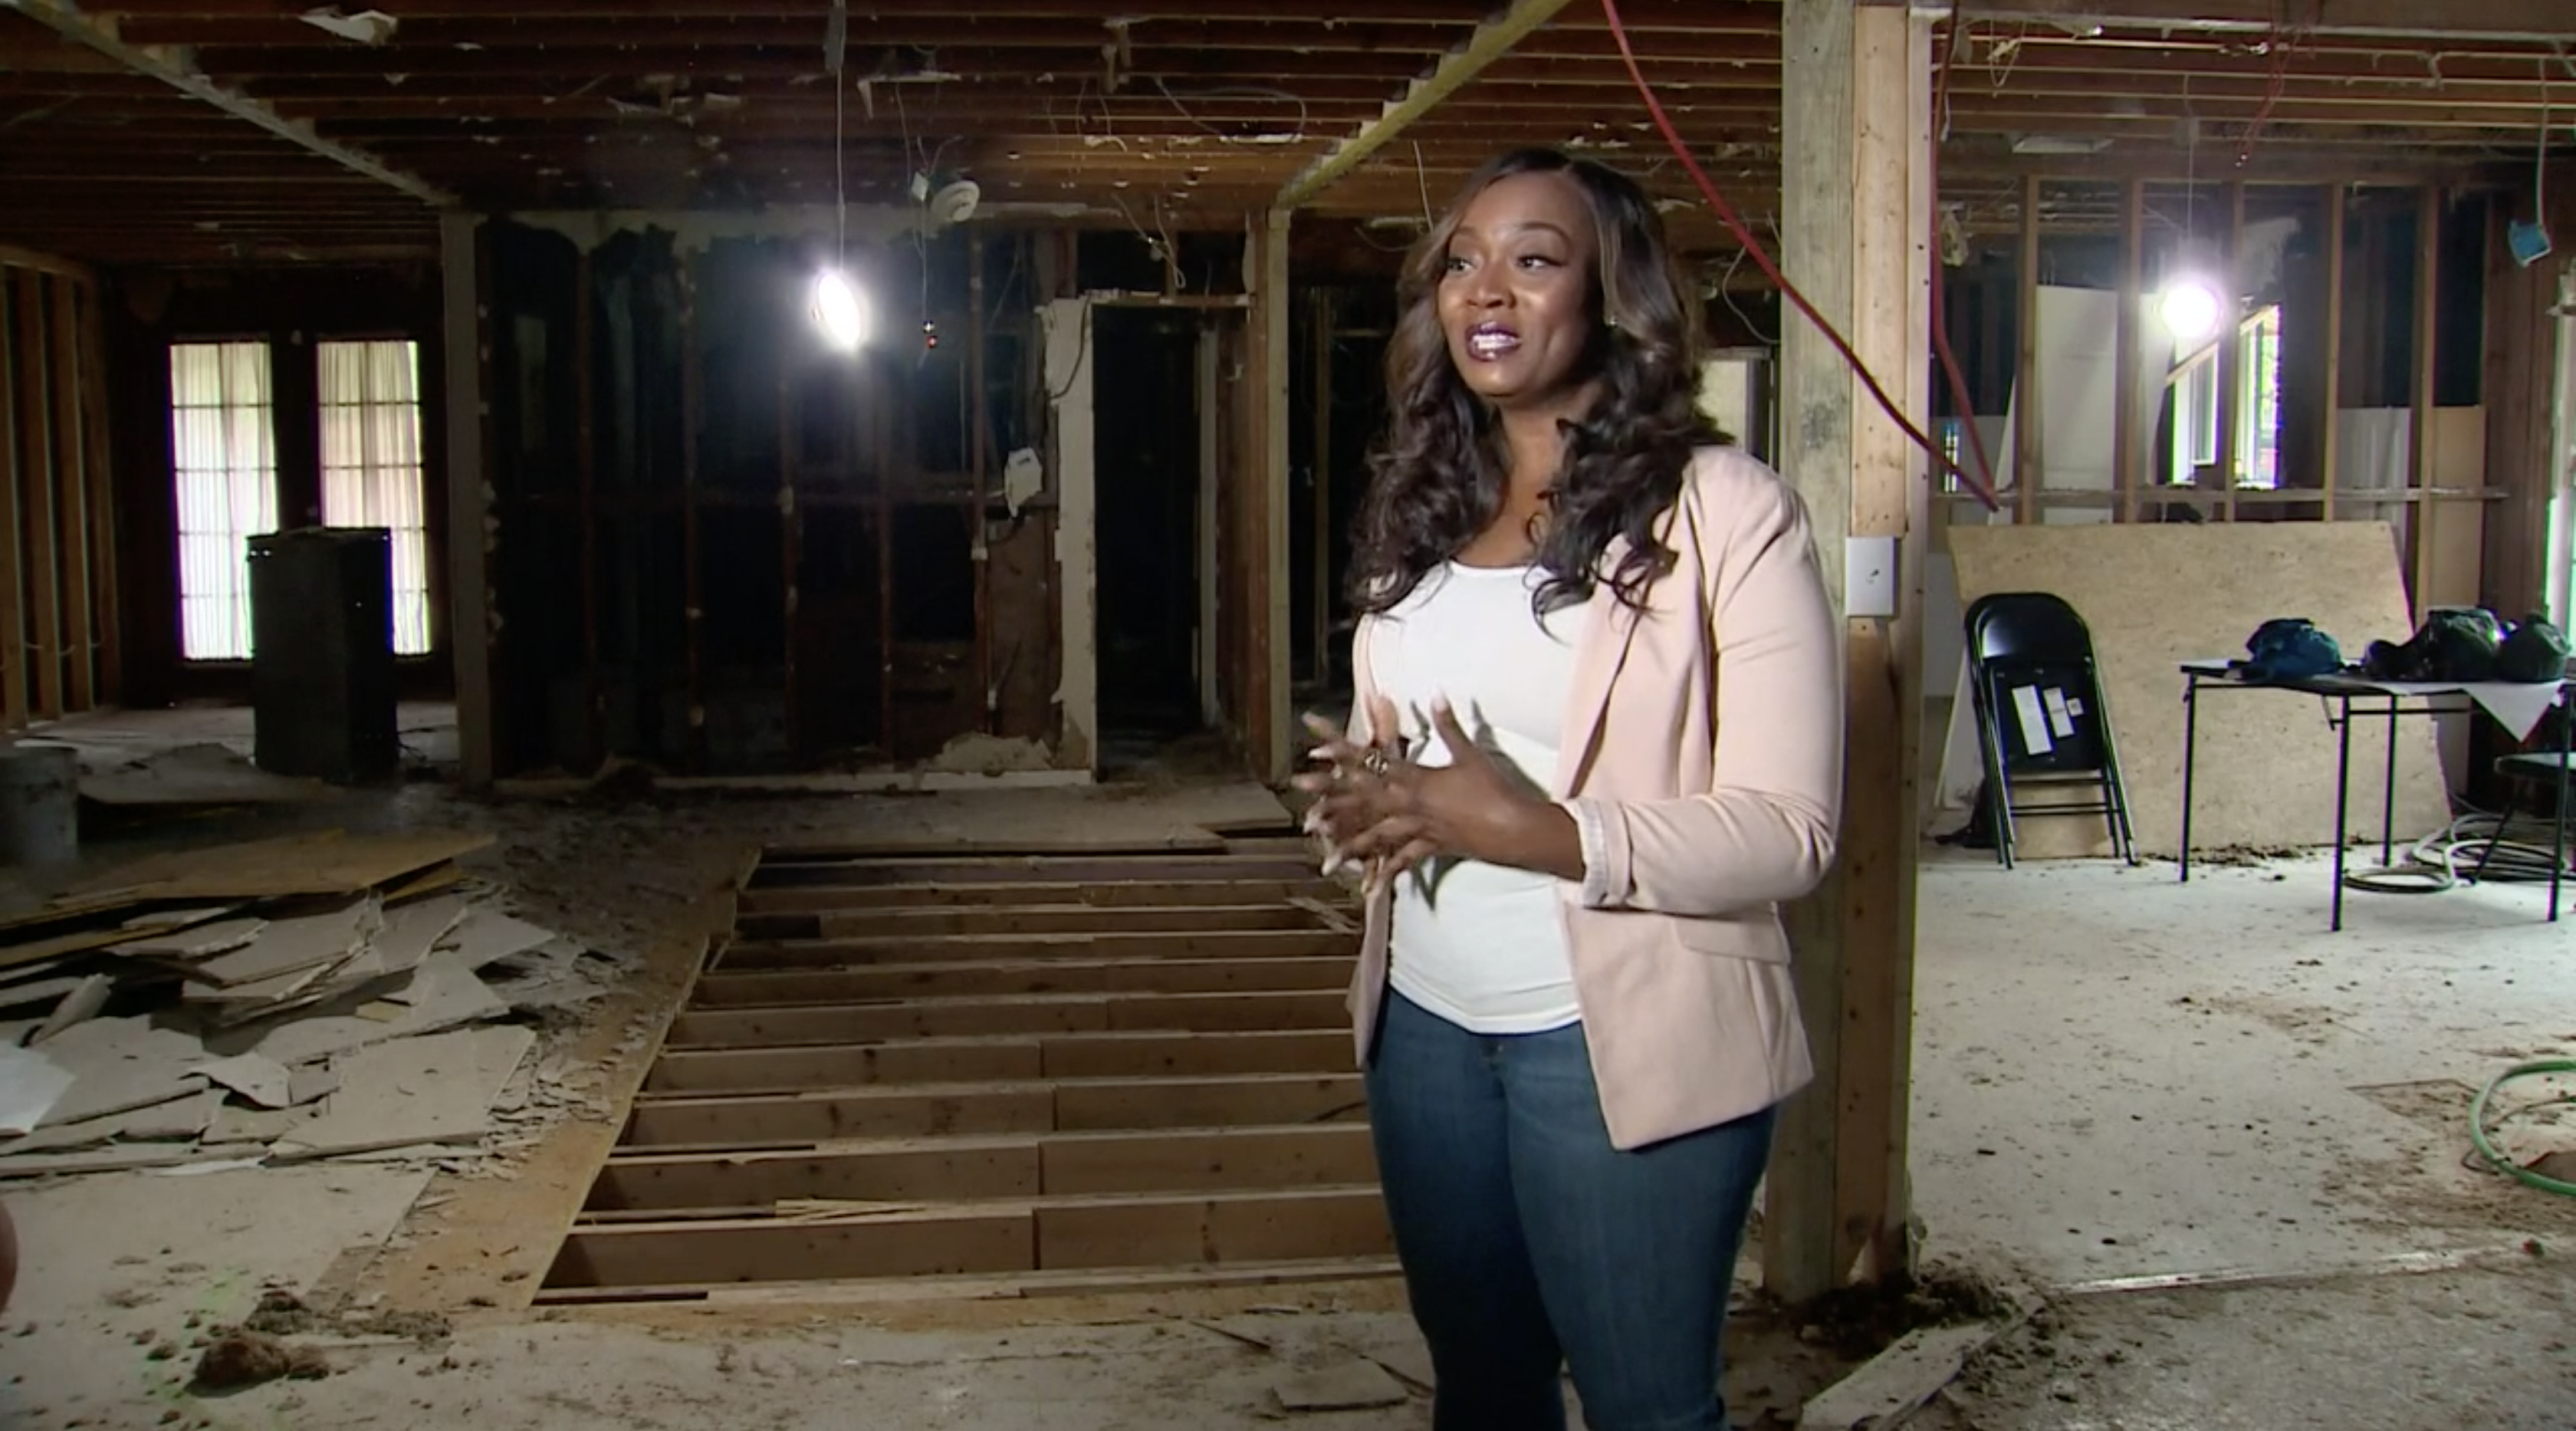 WFAA – Woman hoping to build foster home for teen girls is crushed after she says donor bailed, leaving $400K in work